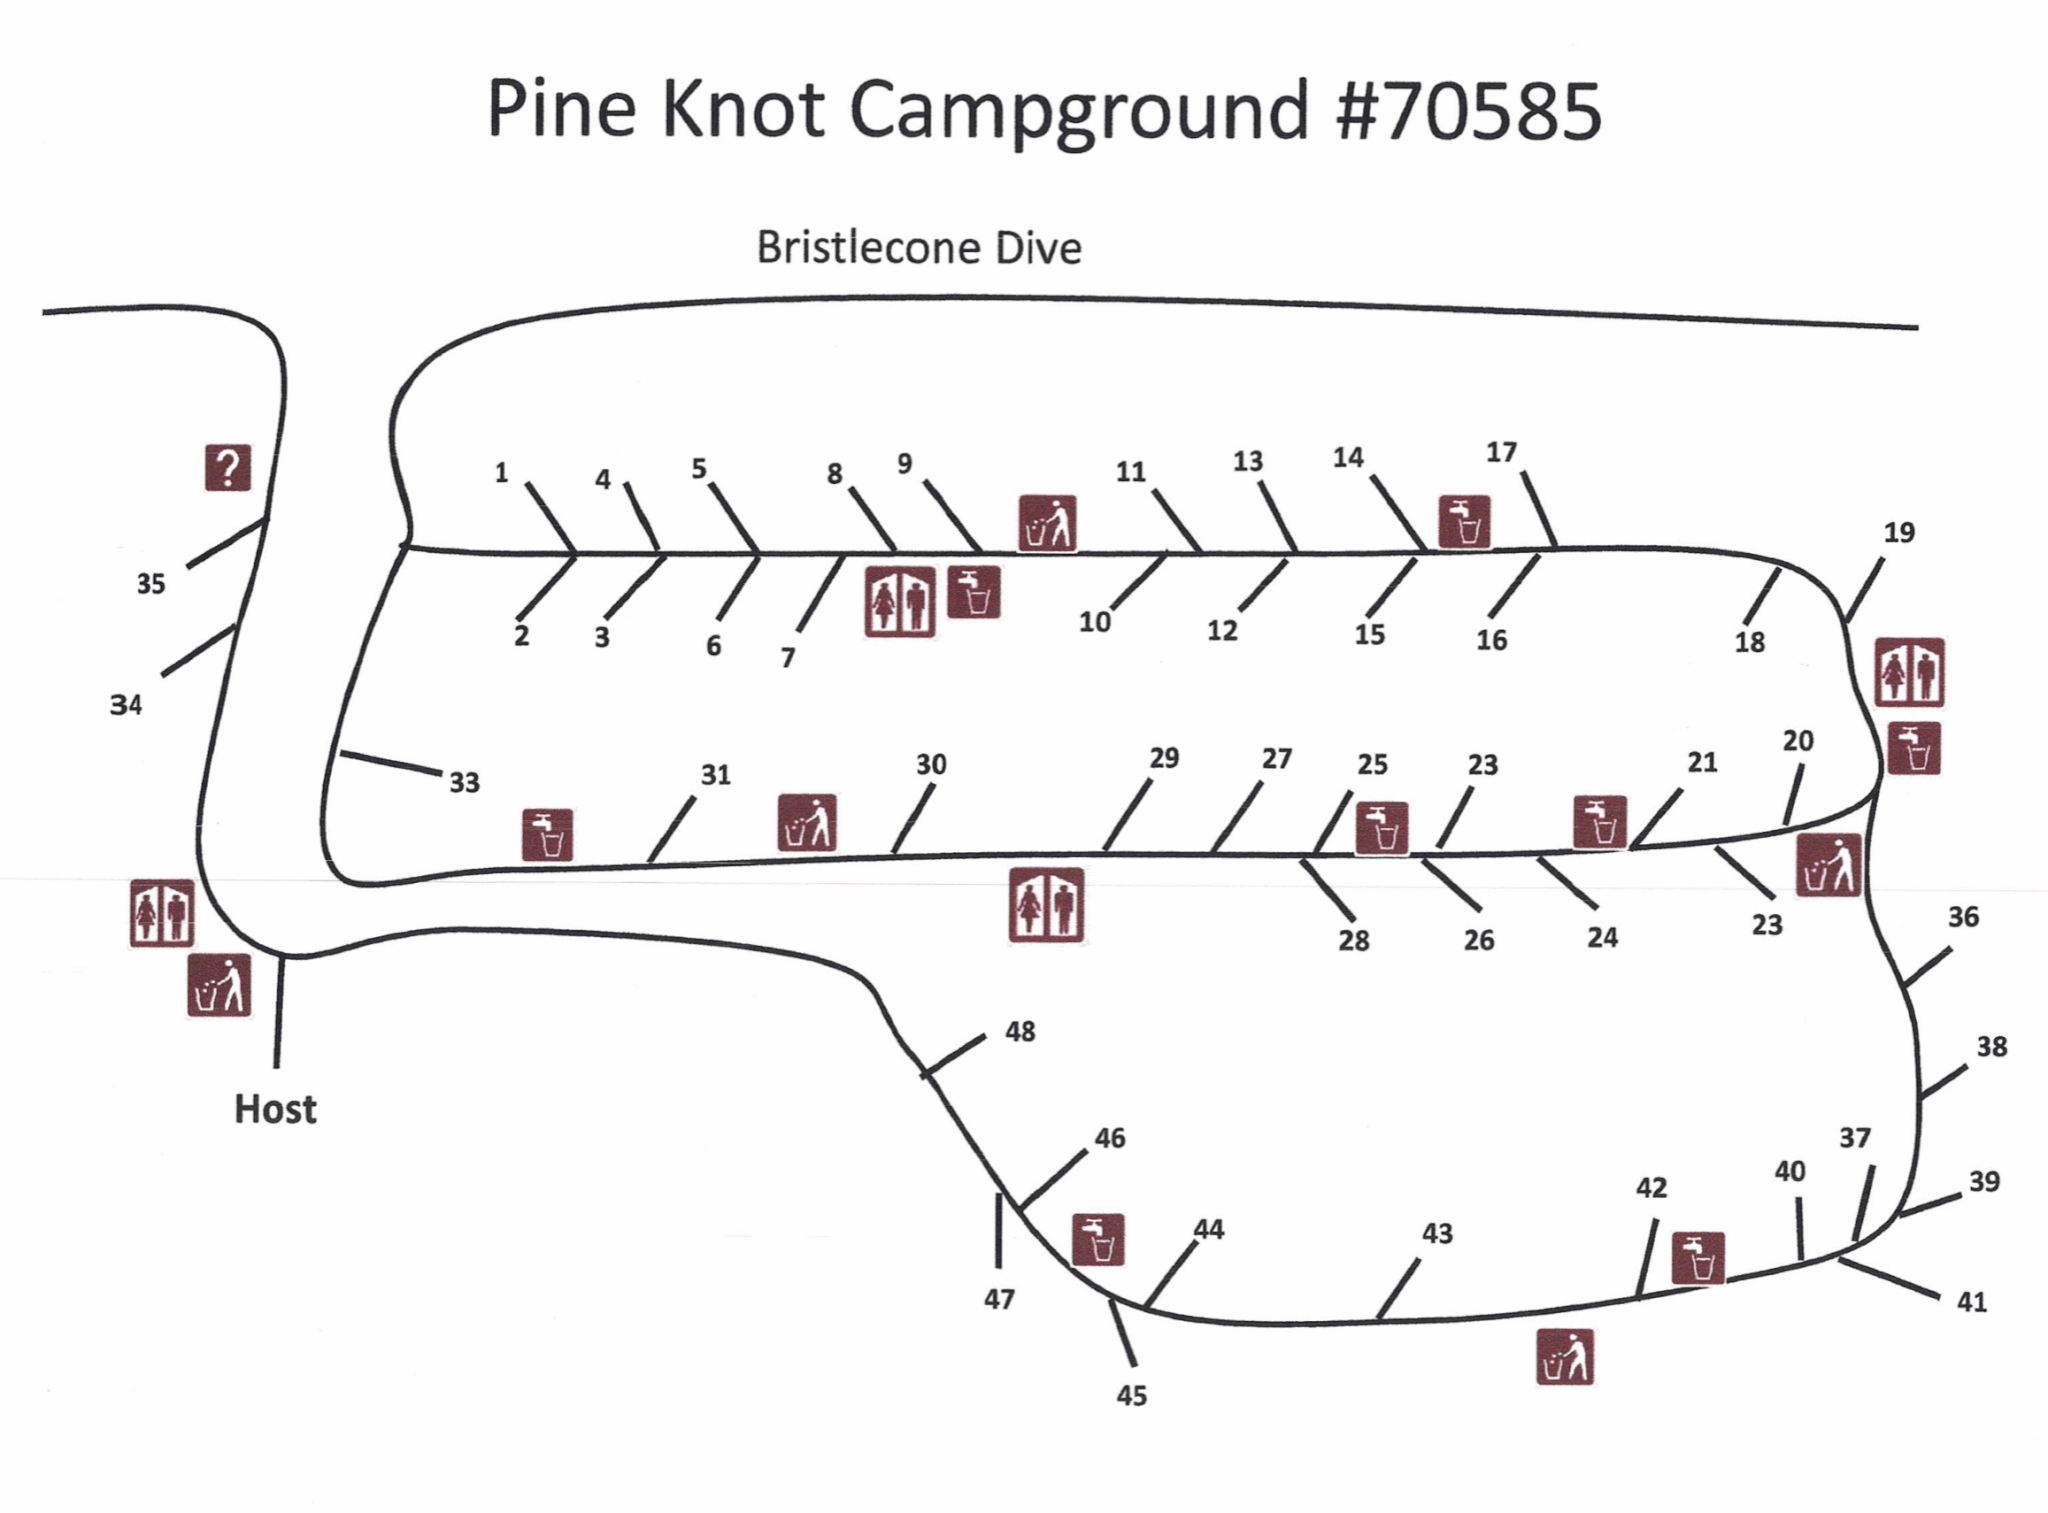 Pineknot - Campsite Photos, Campground Info & Reservations